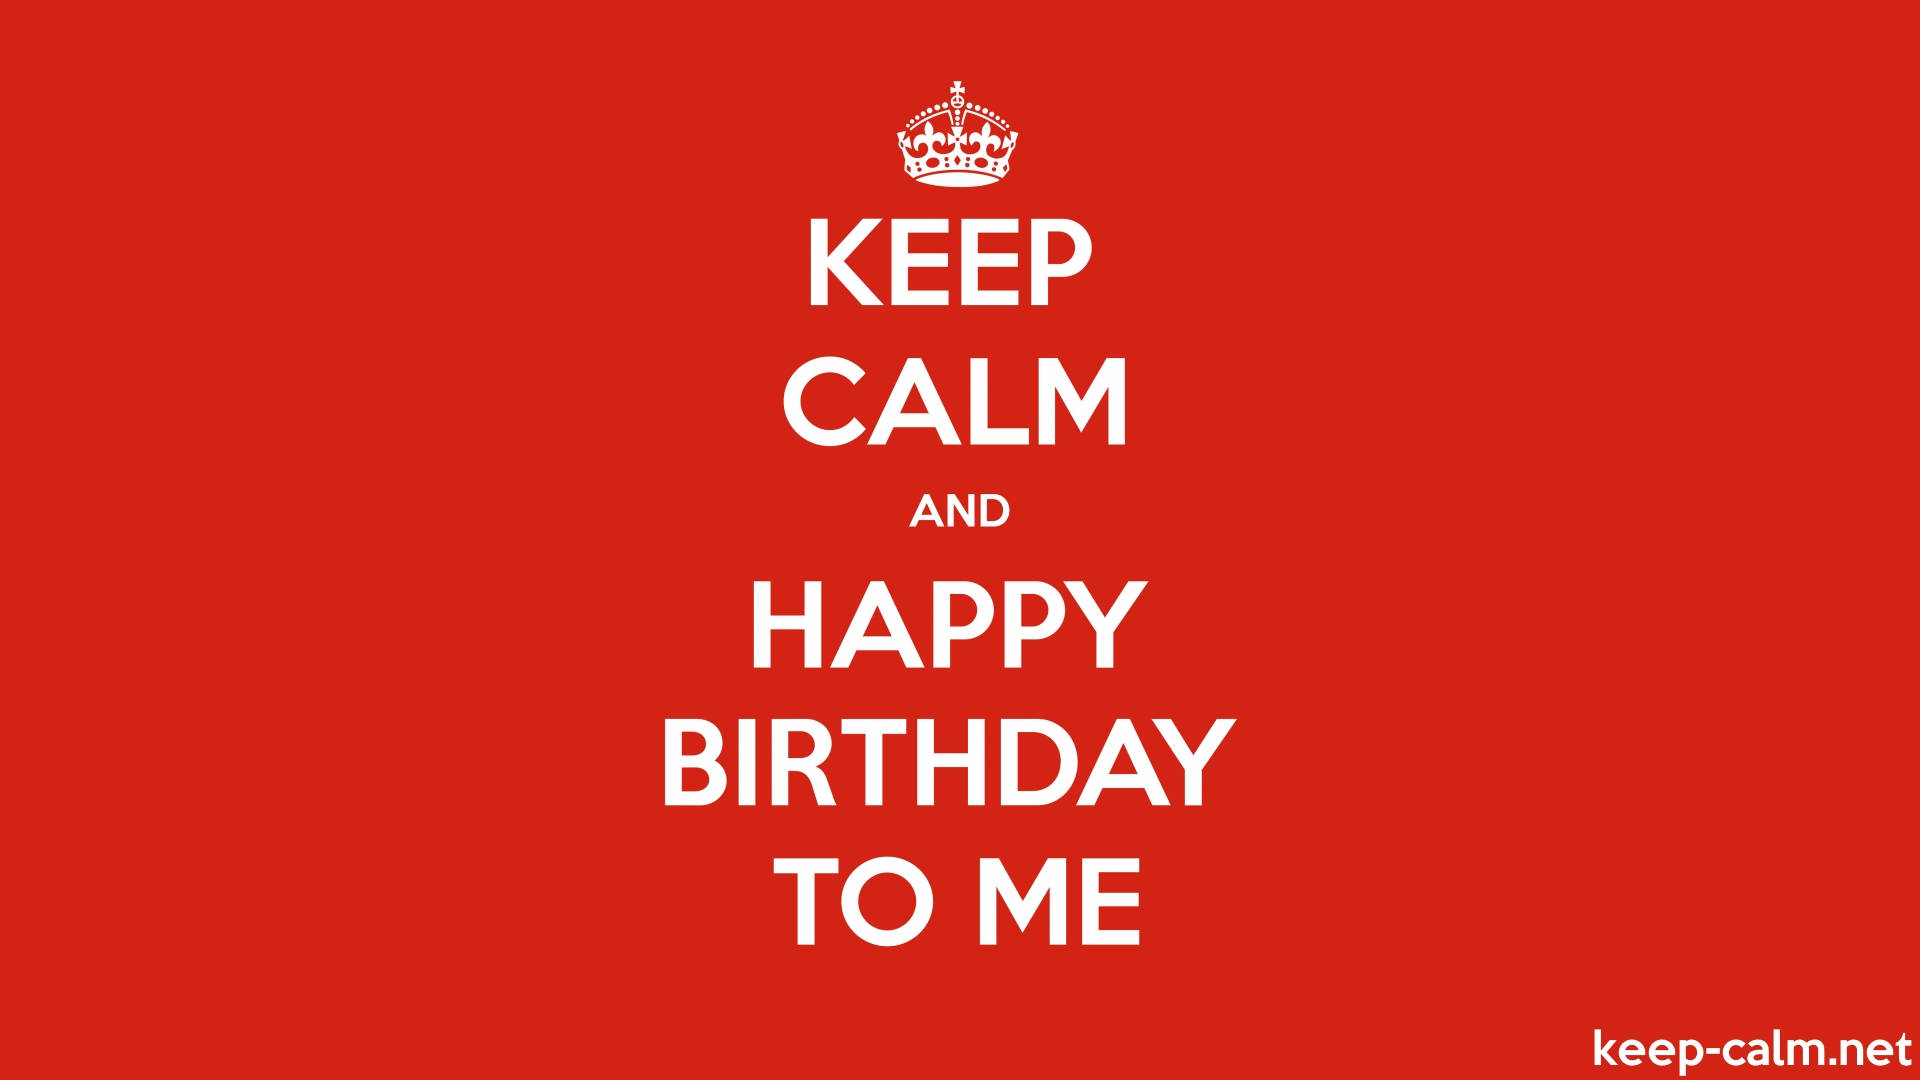 Celebrating Another Year - Happy Birthday To Me!